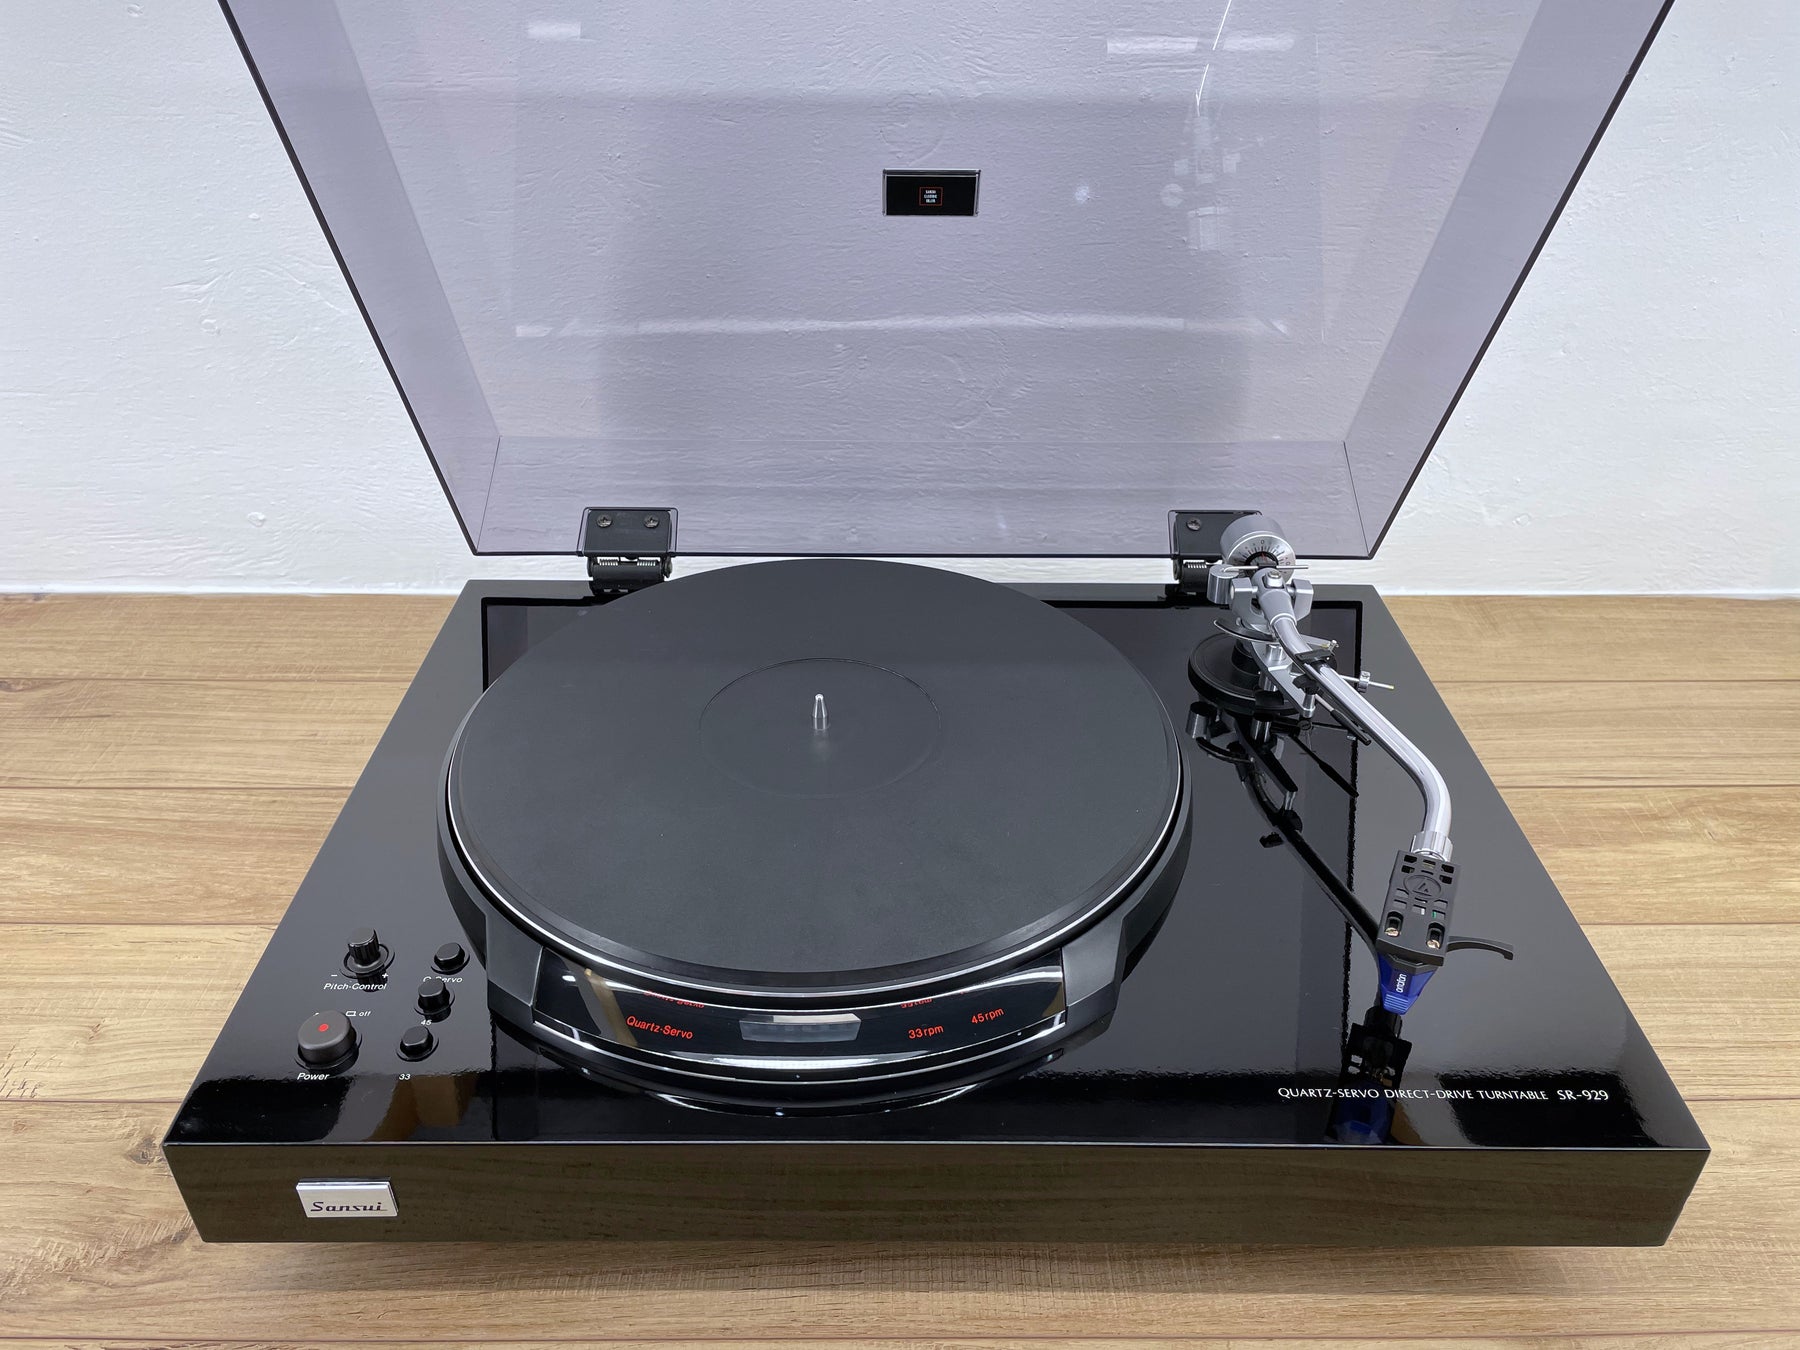 Sansui SR-929 Turntable. Restored and Recapped with New Cardas Wire & Ortofon Cart.